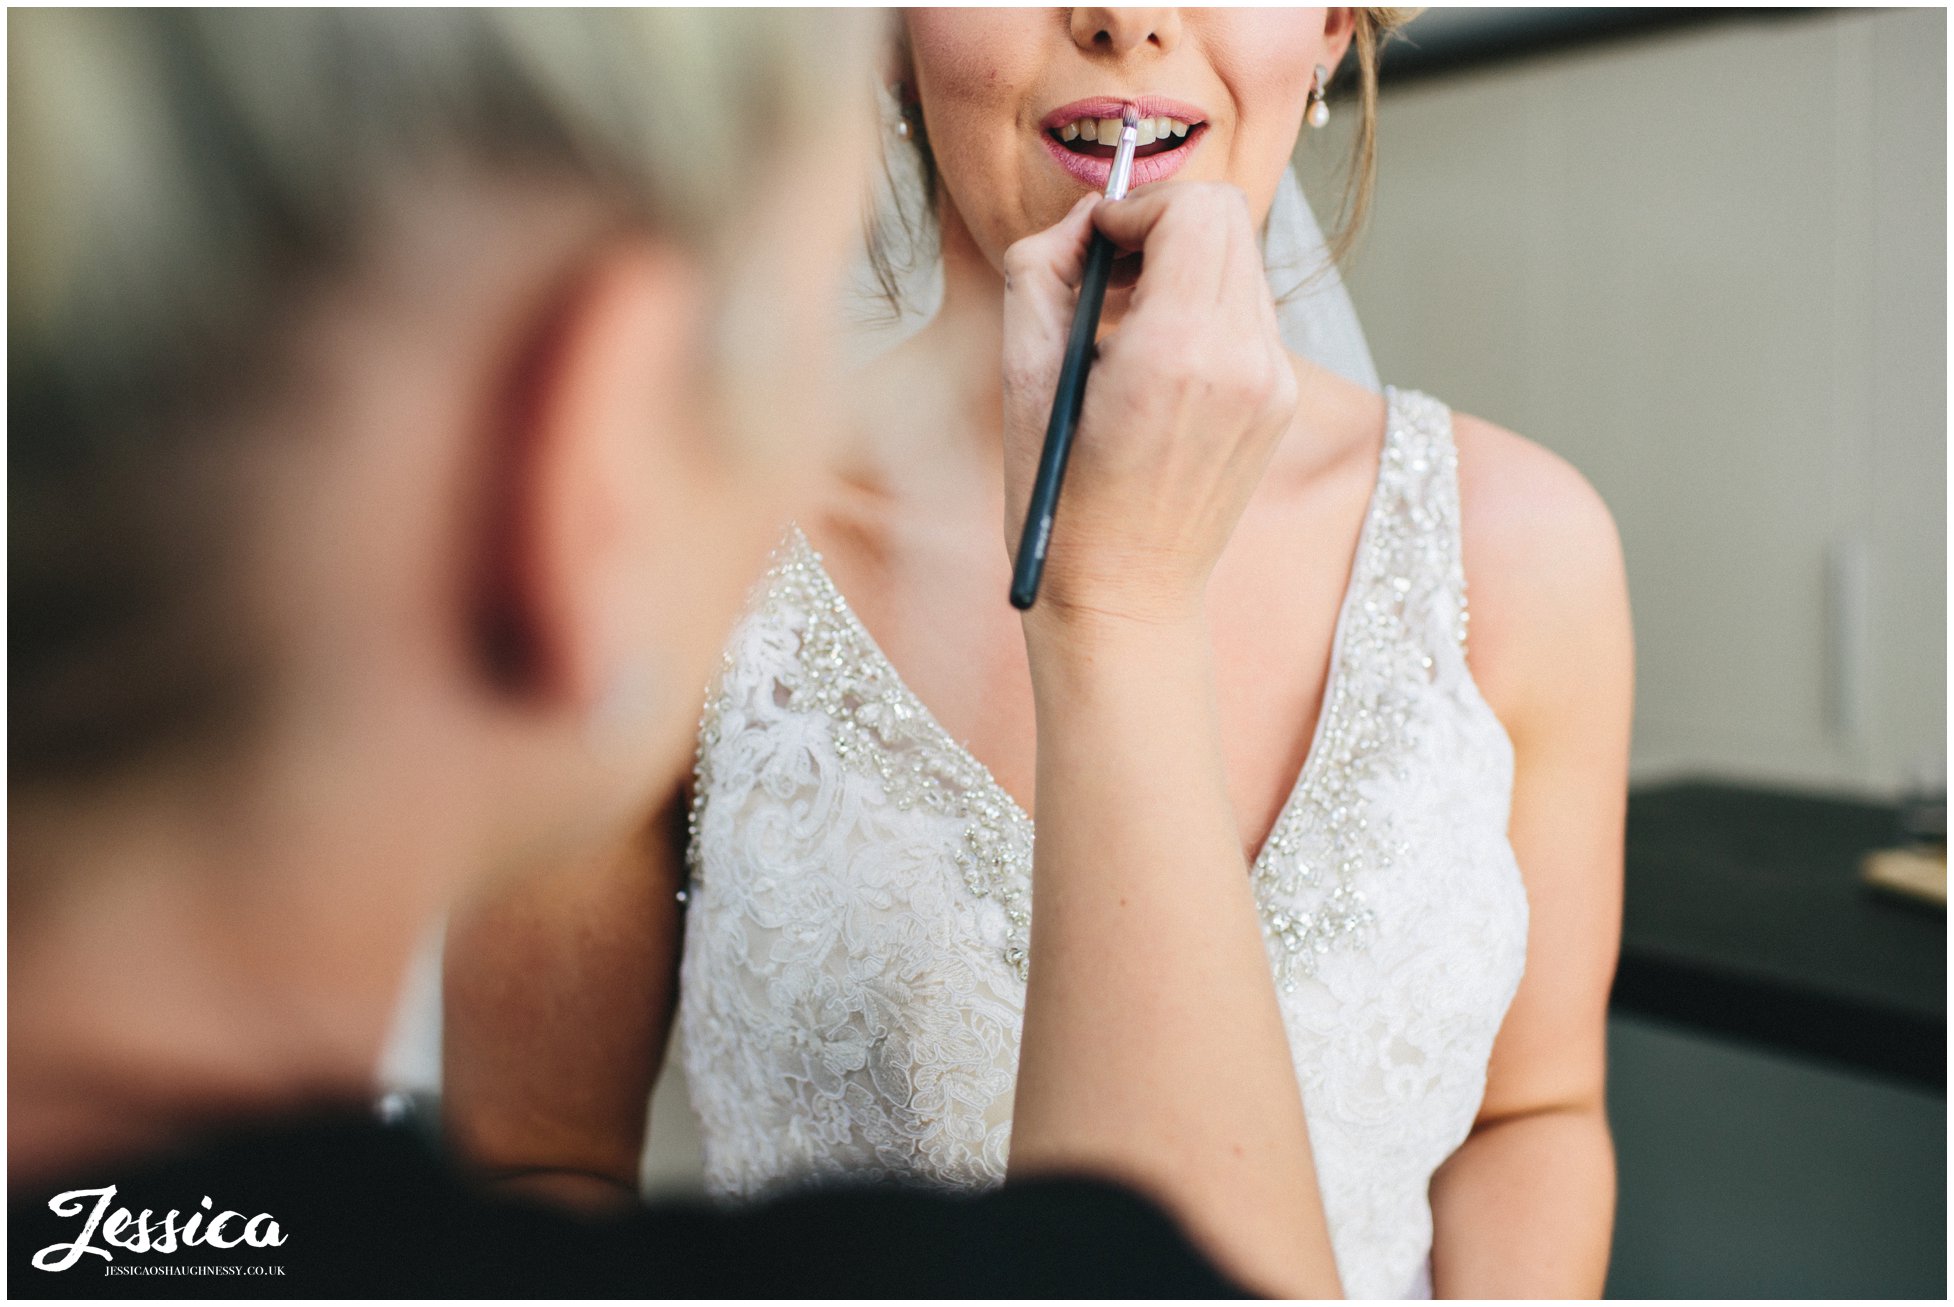 the brides lipstick touch ups before leaving for her ceremony at tower hill barns